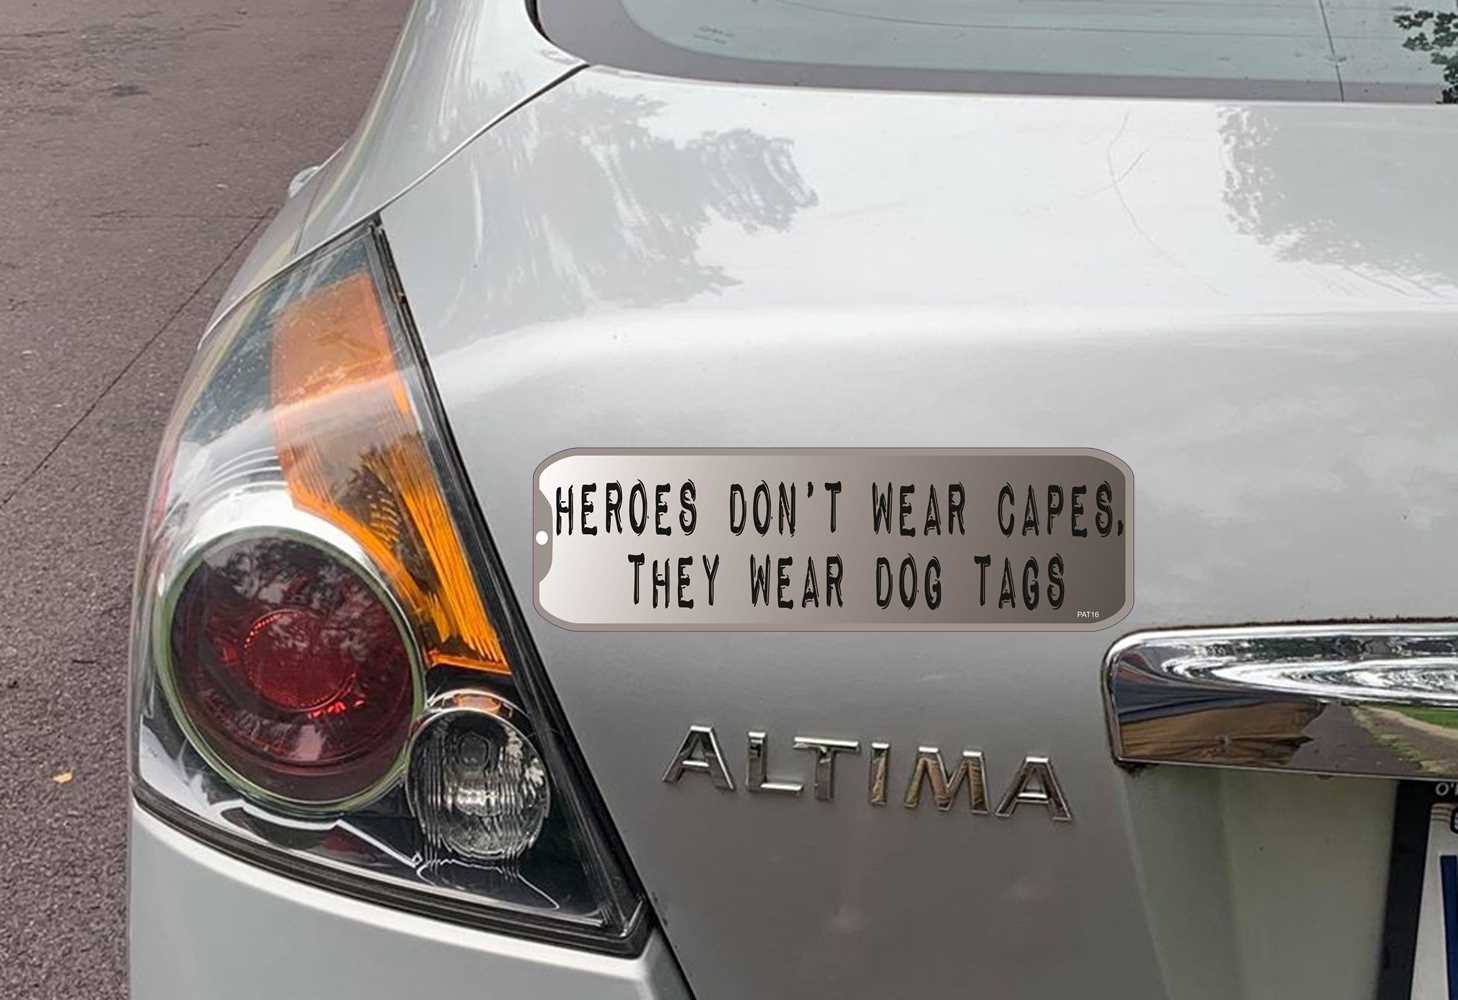 HEROES DON’T WEAR CAPES, THEY WEAR DOG TAGS - PATRIOTIC BUMPER STICKER ON CAR